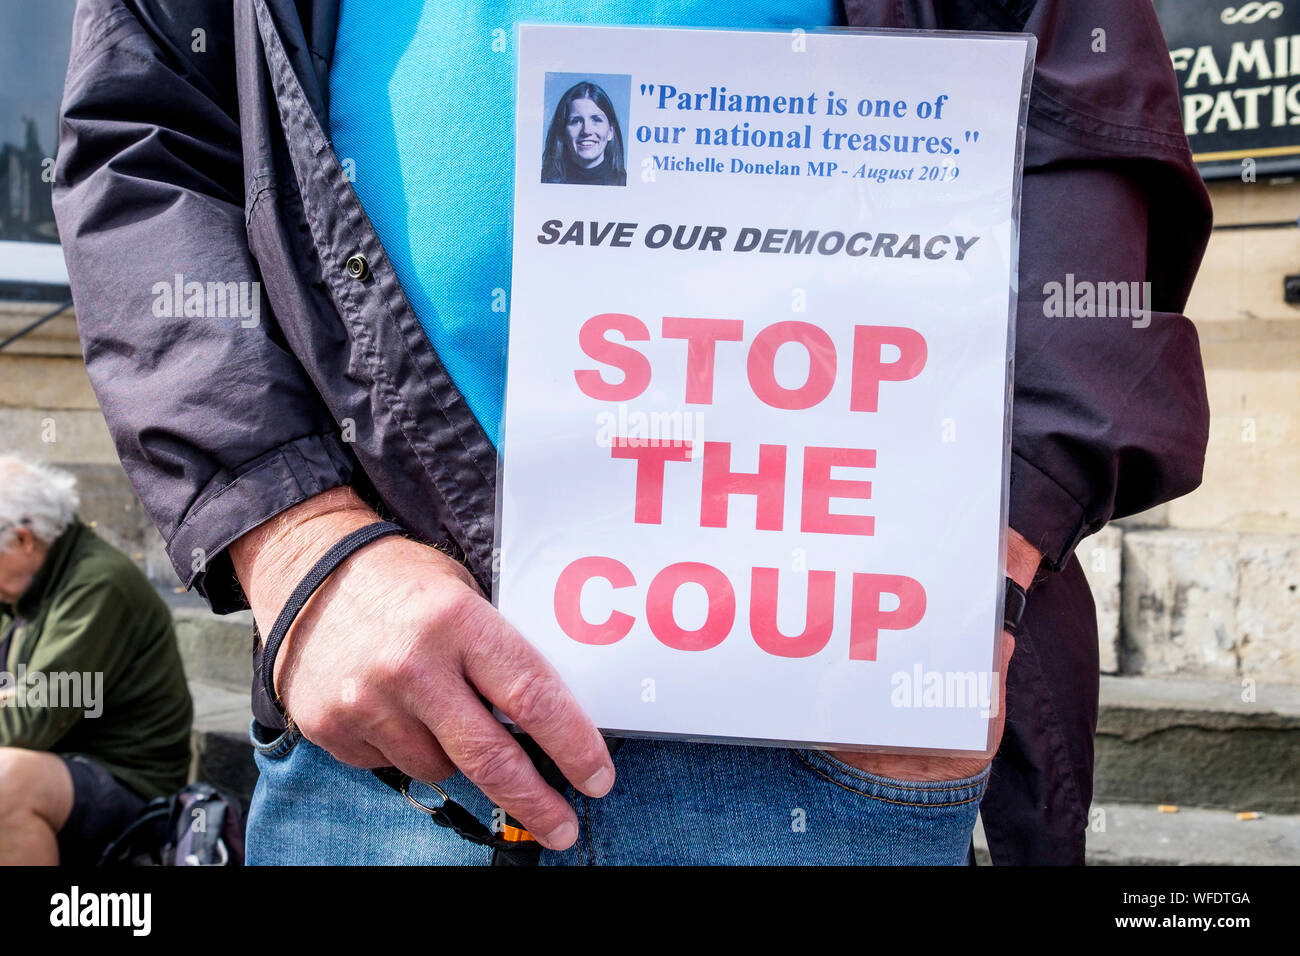 Chippenham, Wiltshire, UK. 31 August, 2019. A protester holding a 'stop the coup' sign is pictured as he protests outside the Chippenham offices of Michelle Donelan, the Conservative MP for Chippenham. The protest against Boris Johnson's decision to prorogue Parliament was organised by the Chippenham constituency Labour Party. Credit: Lynchpics/Alamy Live News Stock Photo